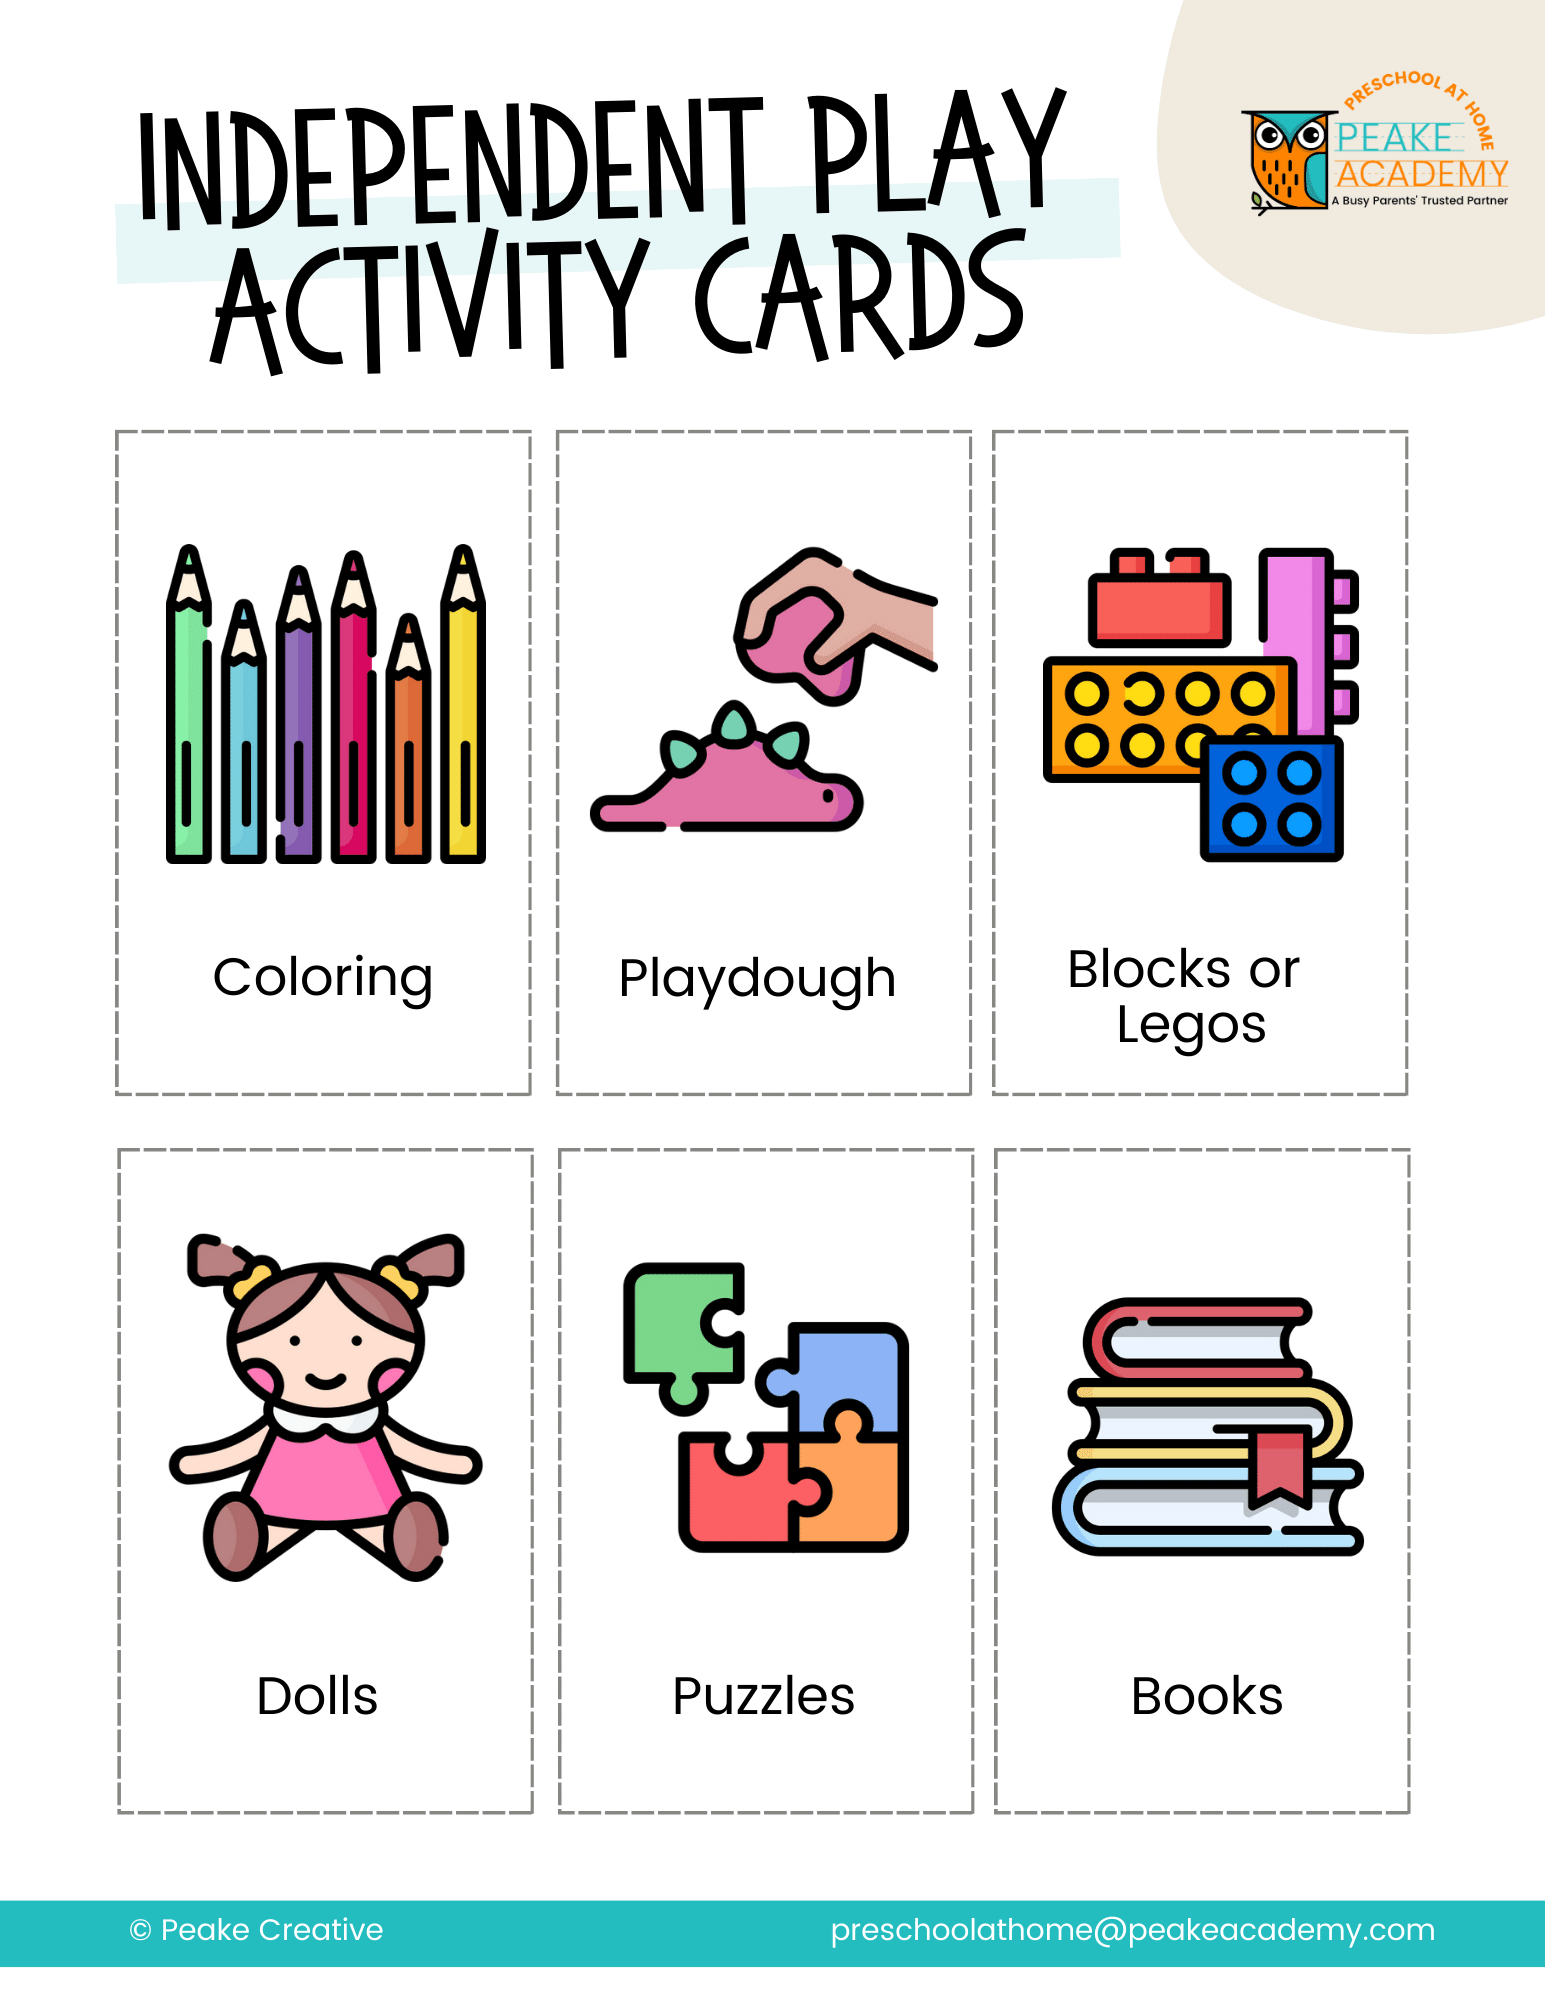 Independent Play Activity Cards_Peake Academy (1).png